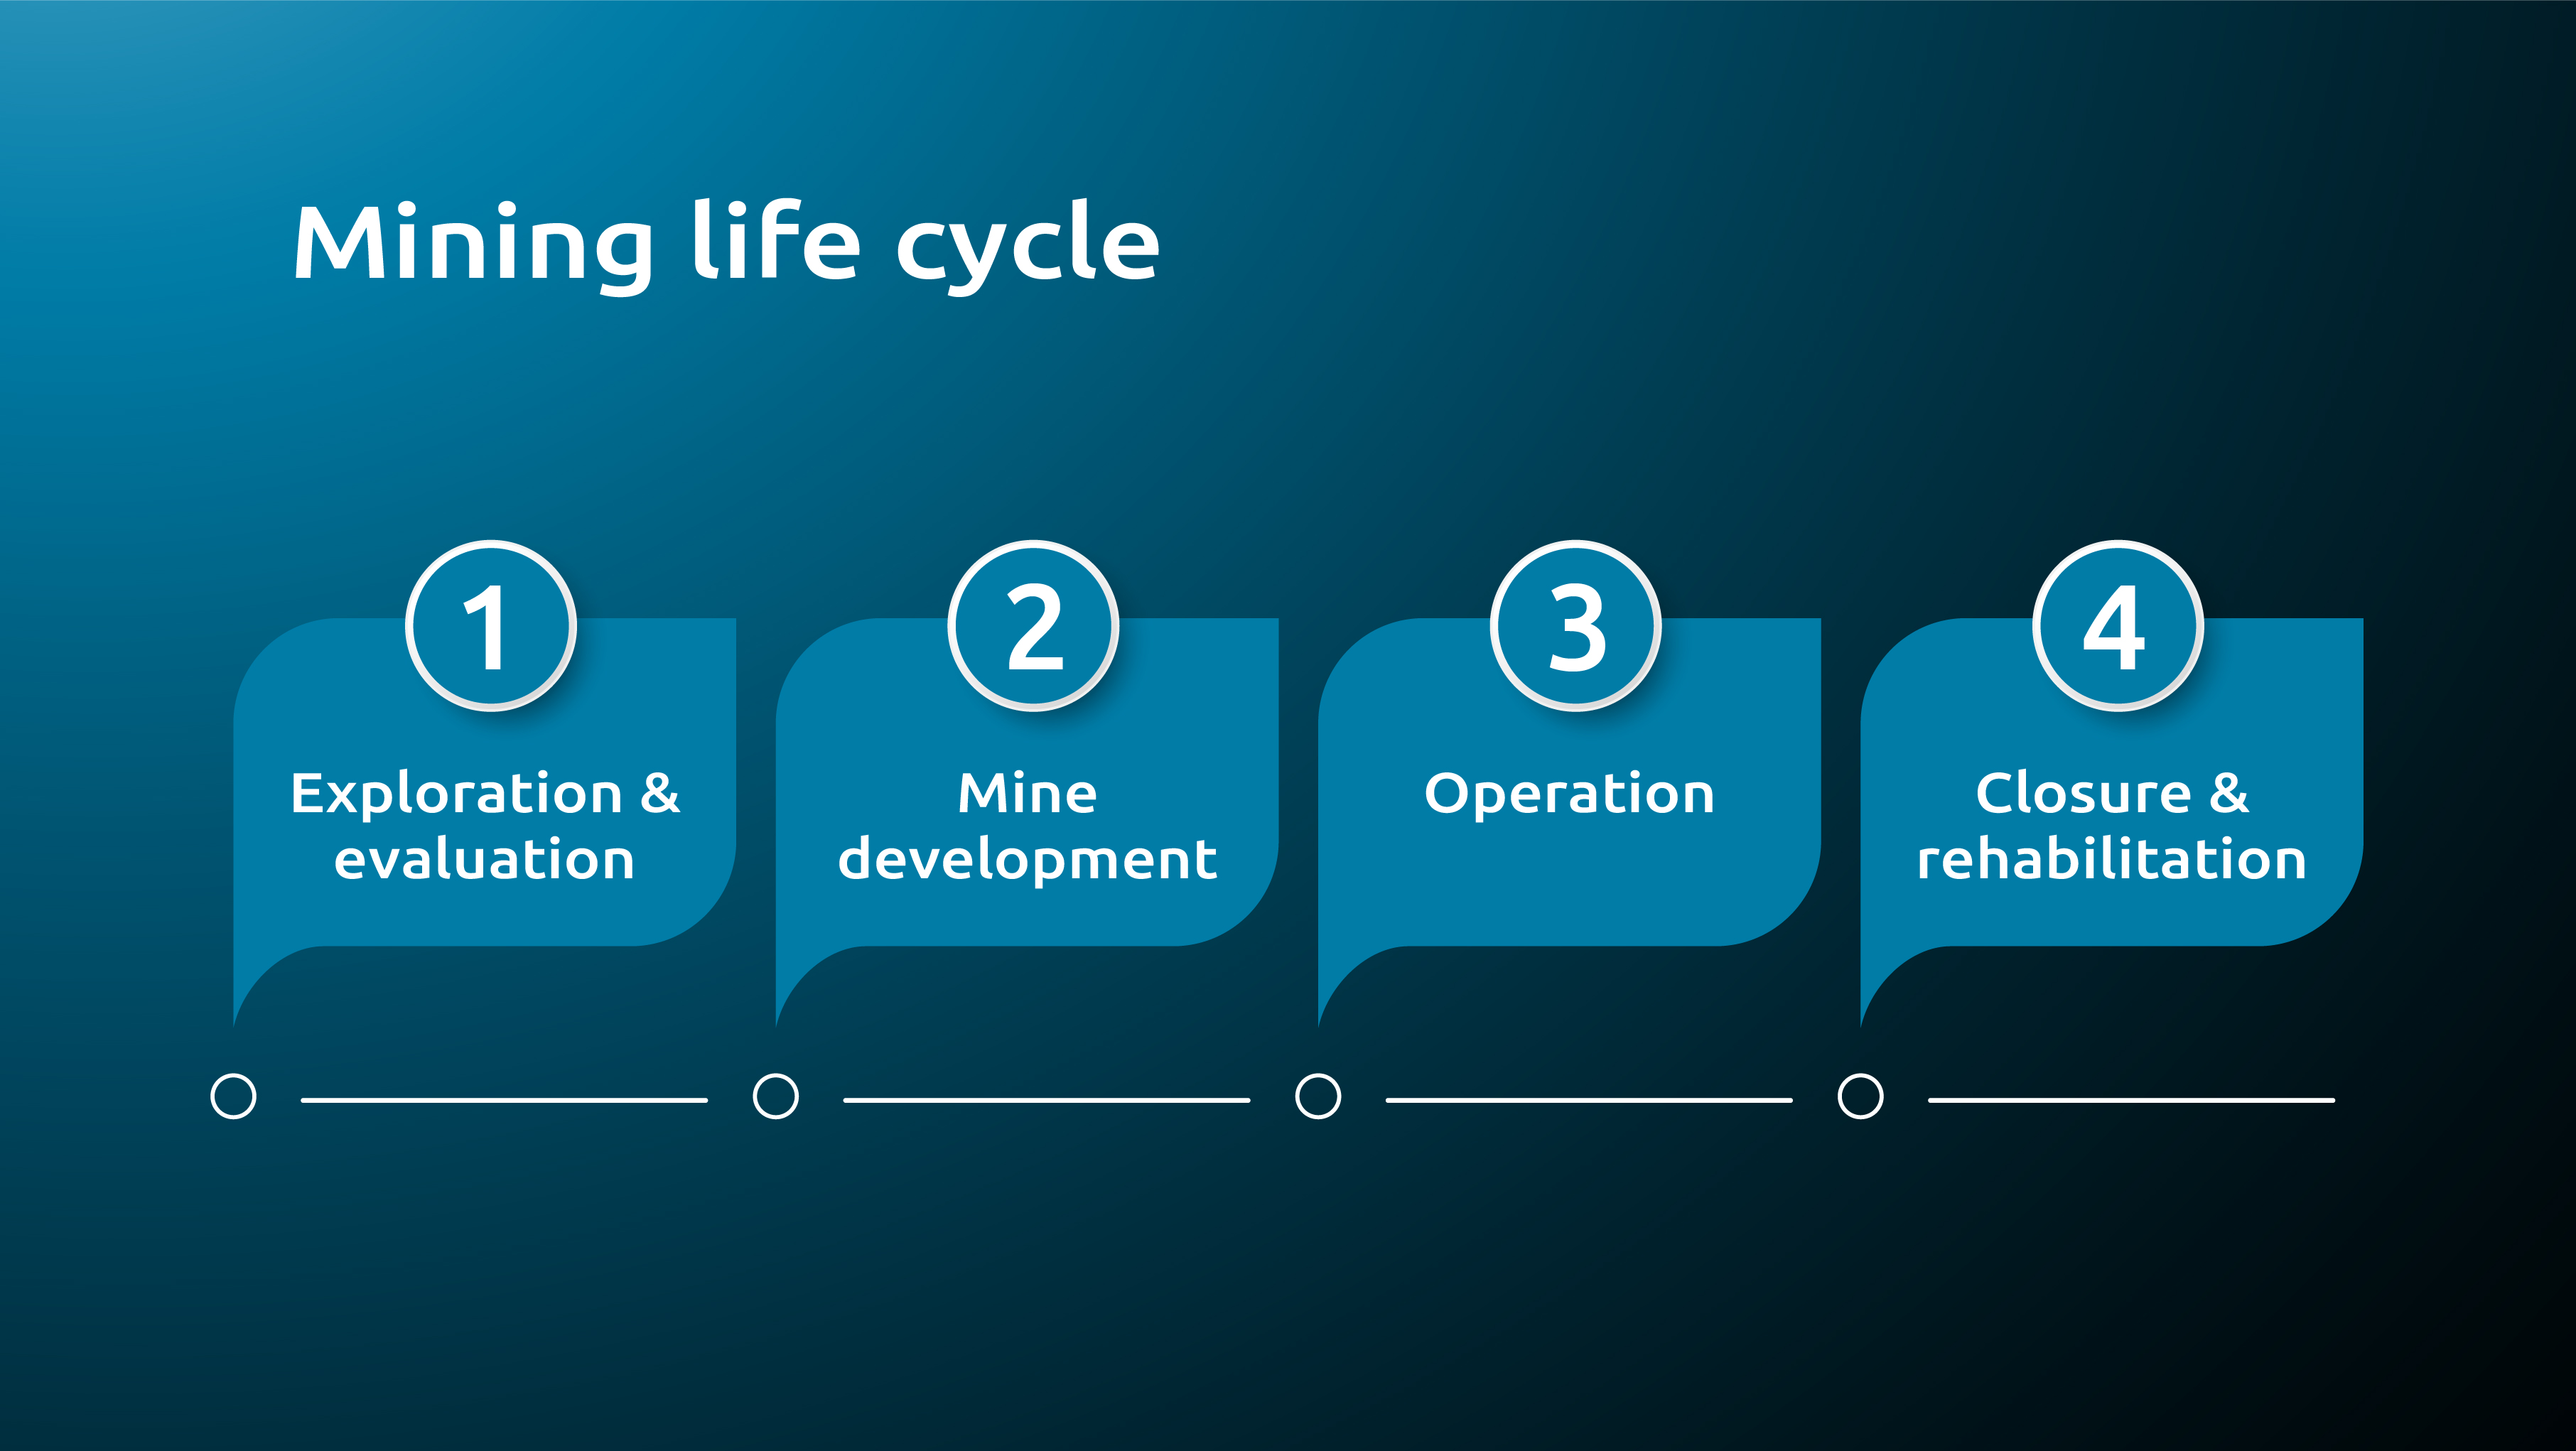 Total overview of the four phases of the mining life cycle